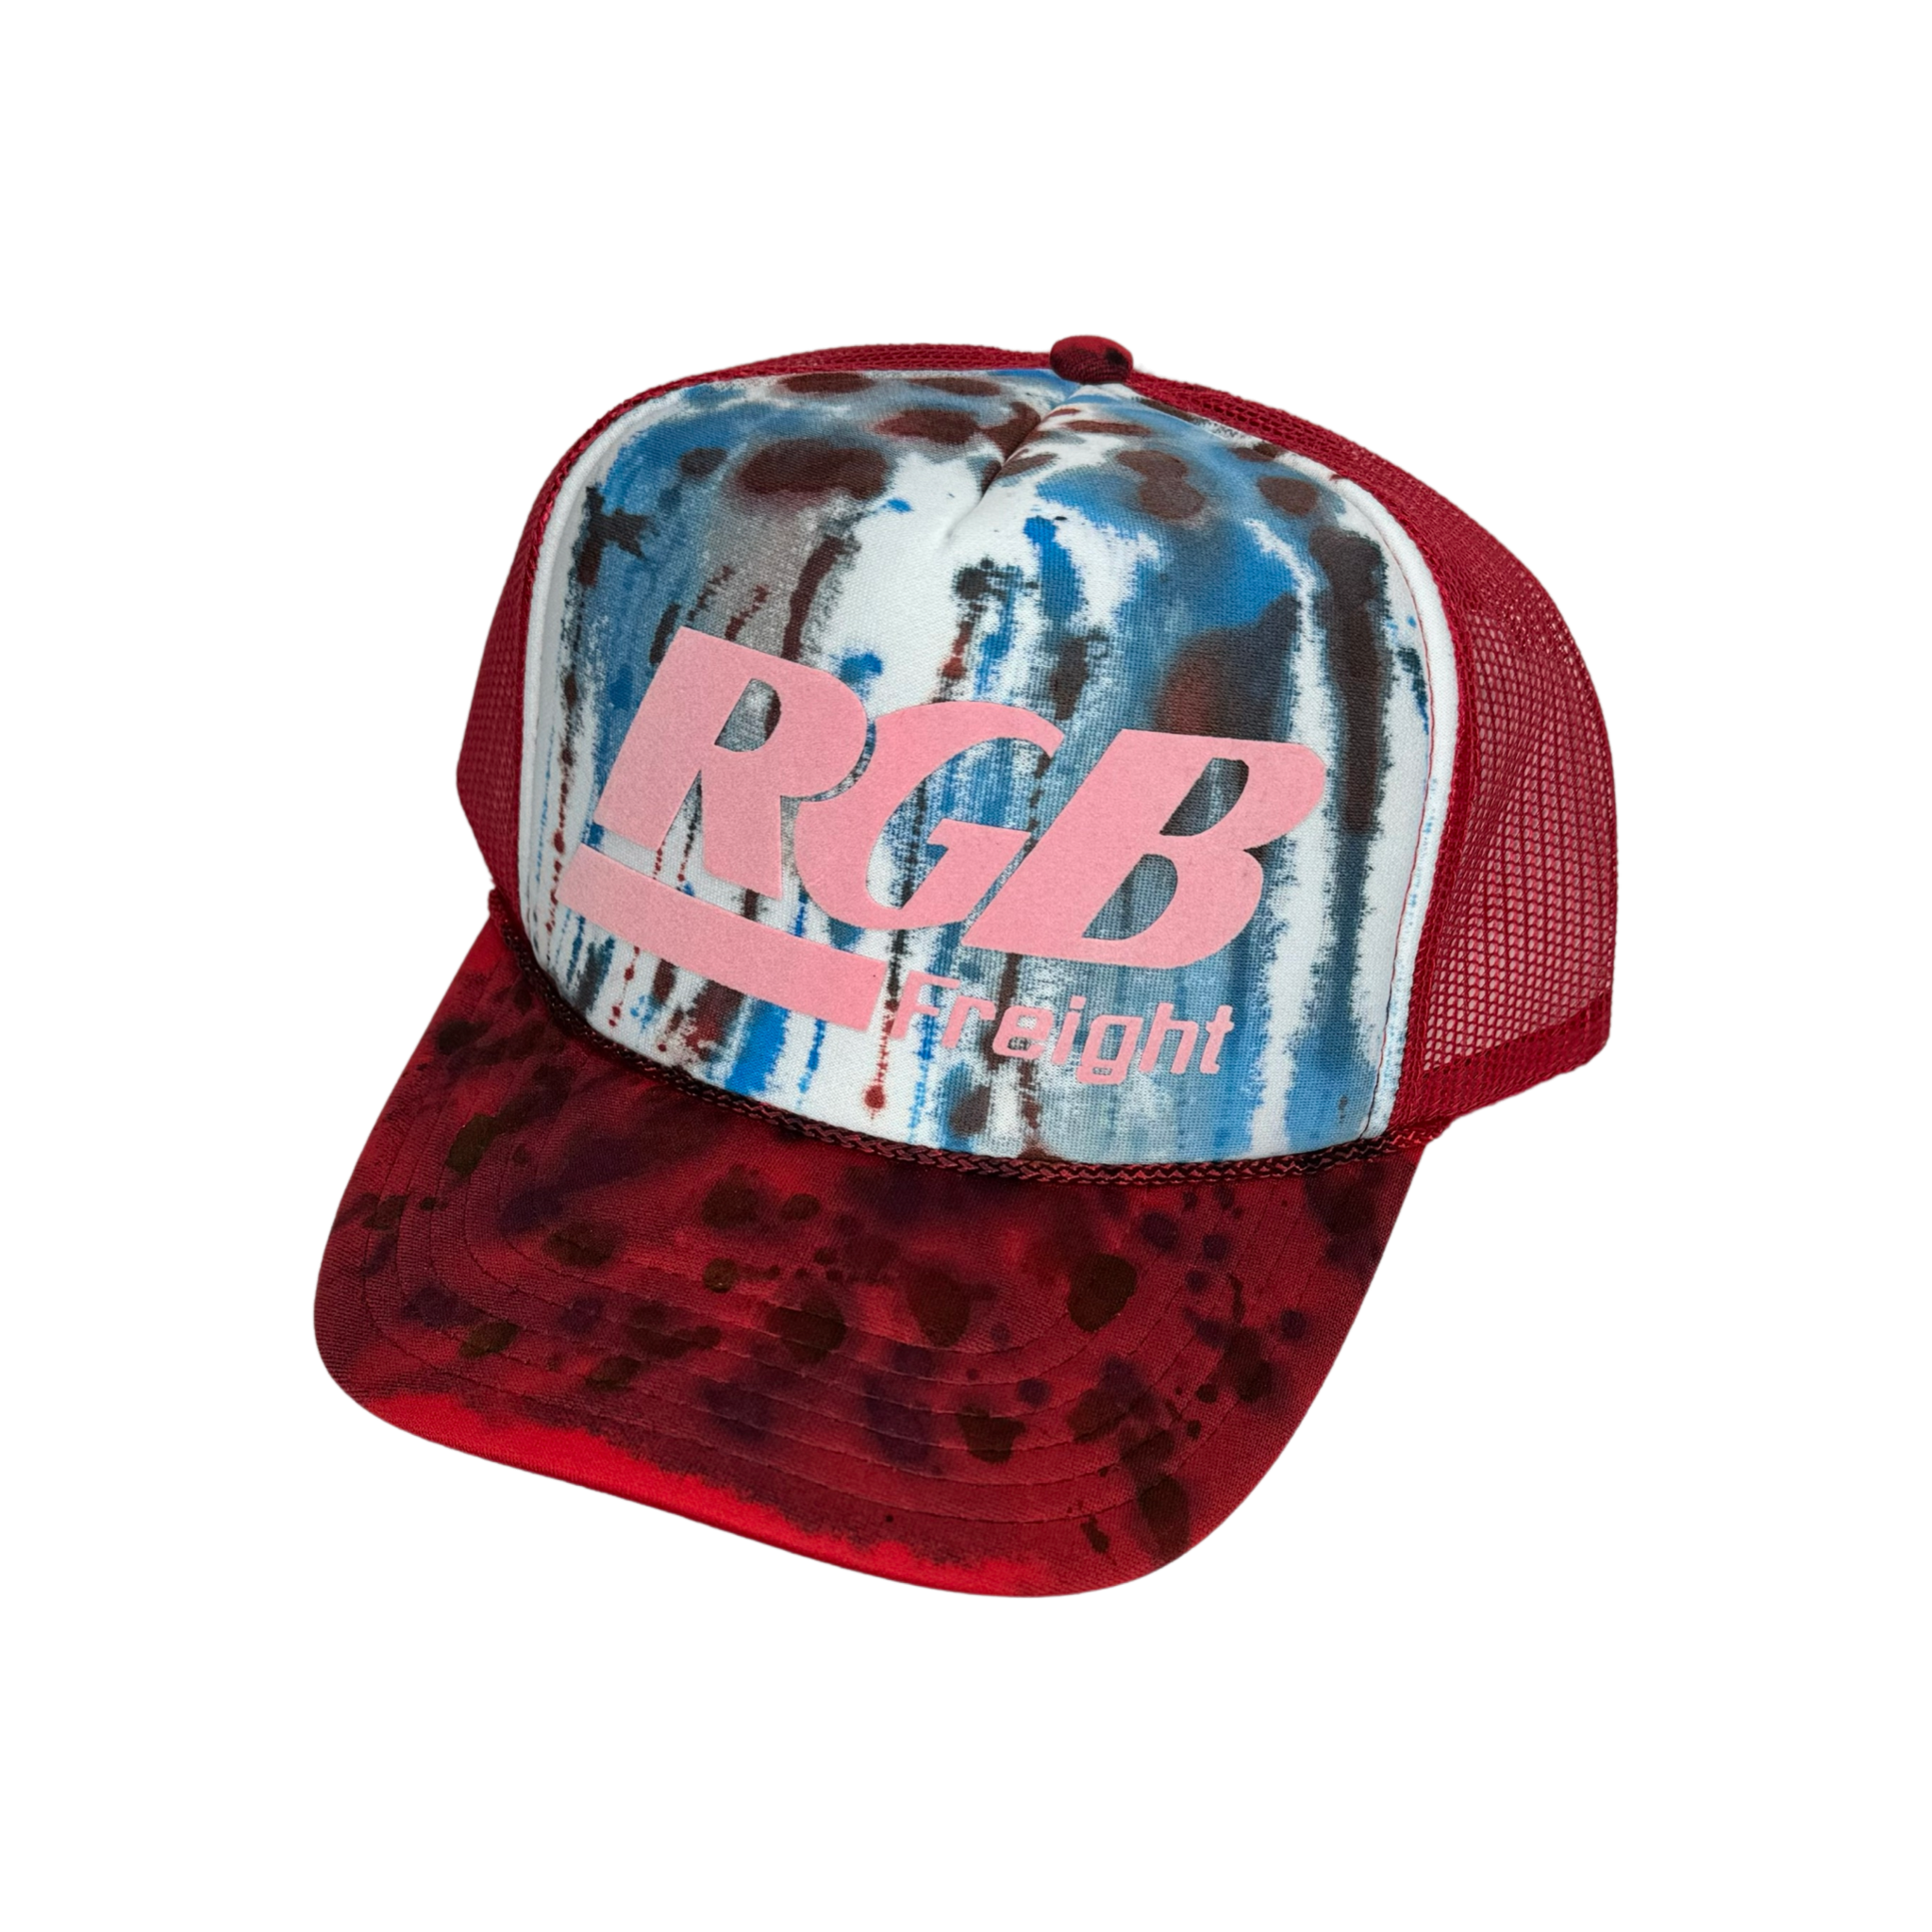 RGB FREIGHT TRUCKER HAT -  1 of 1 DYED